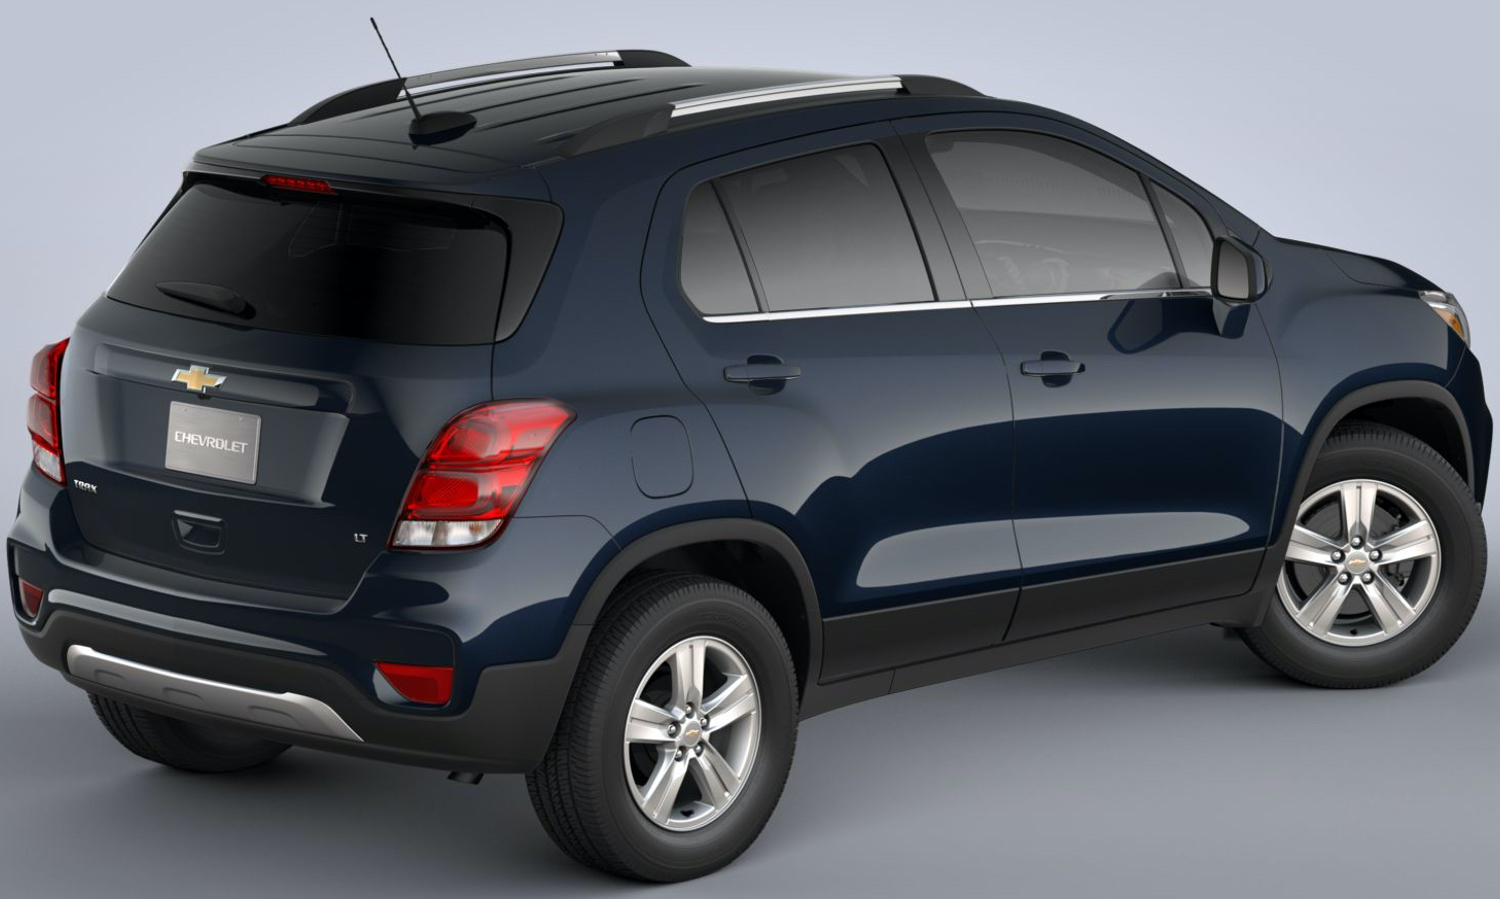 2021 Chevrolet Trax Gets New Midnight Blue Color: First Look